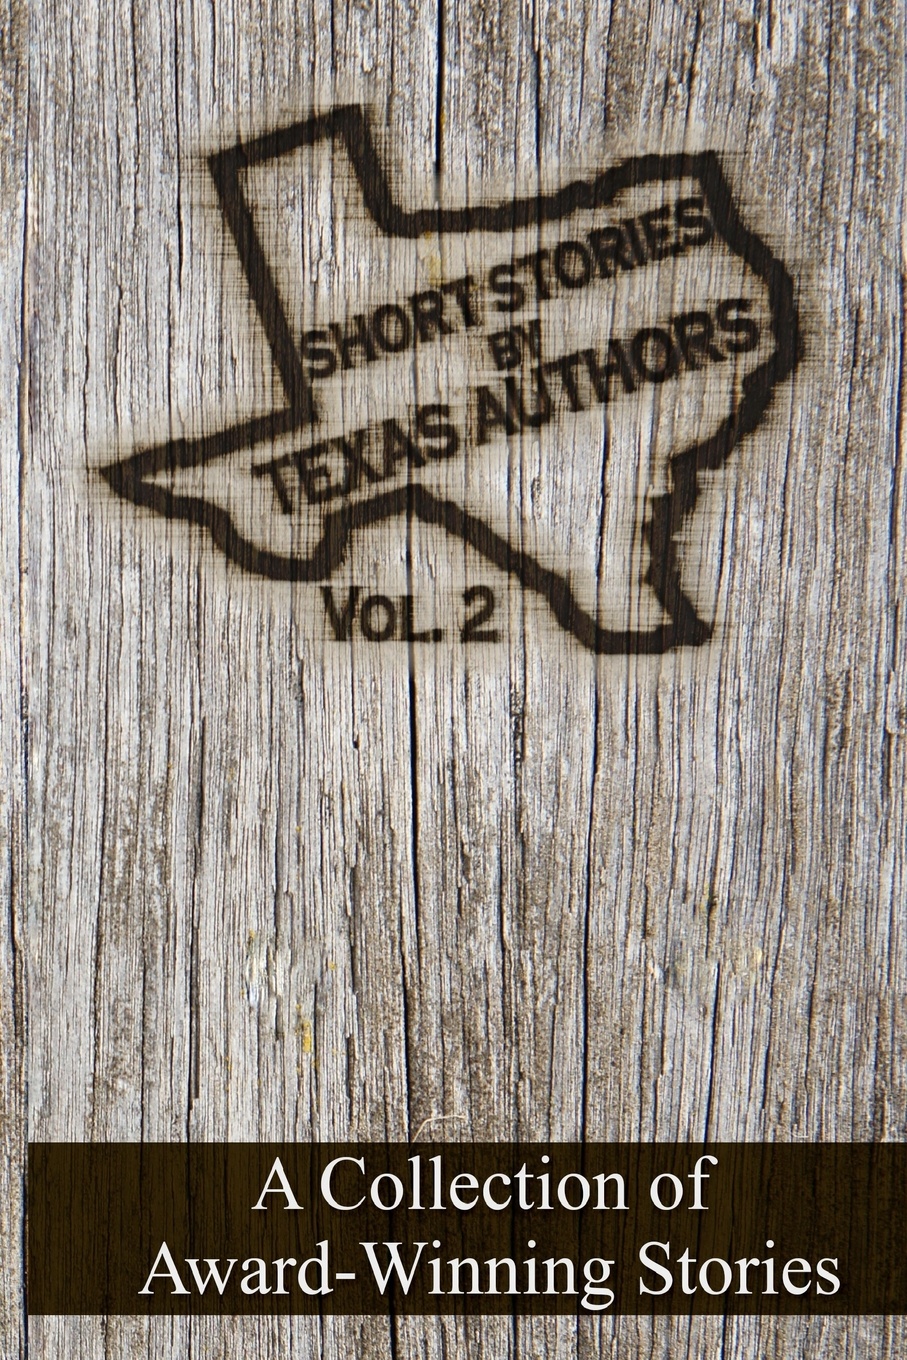 Short Stories by Texas Authors. Volume 2